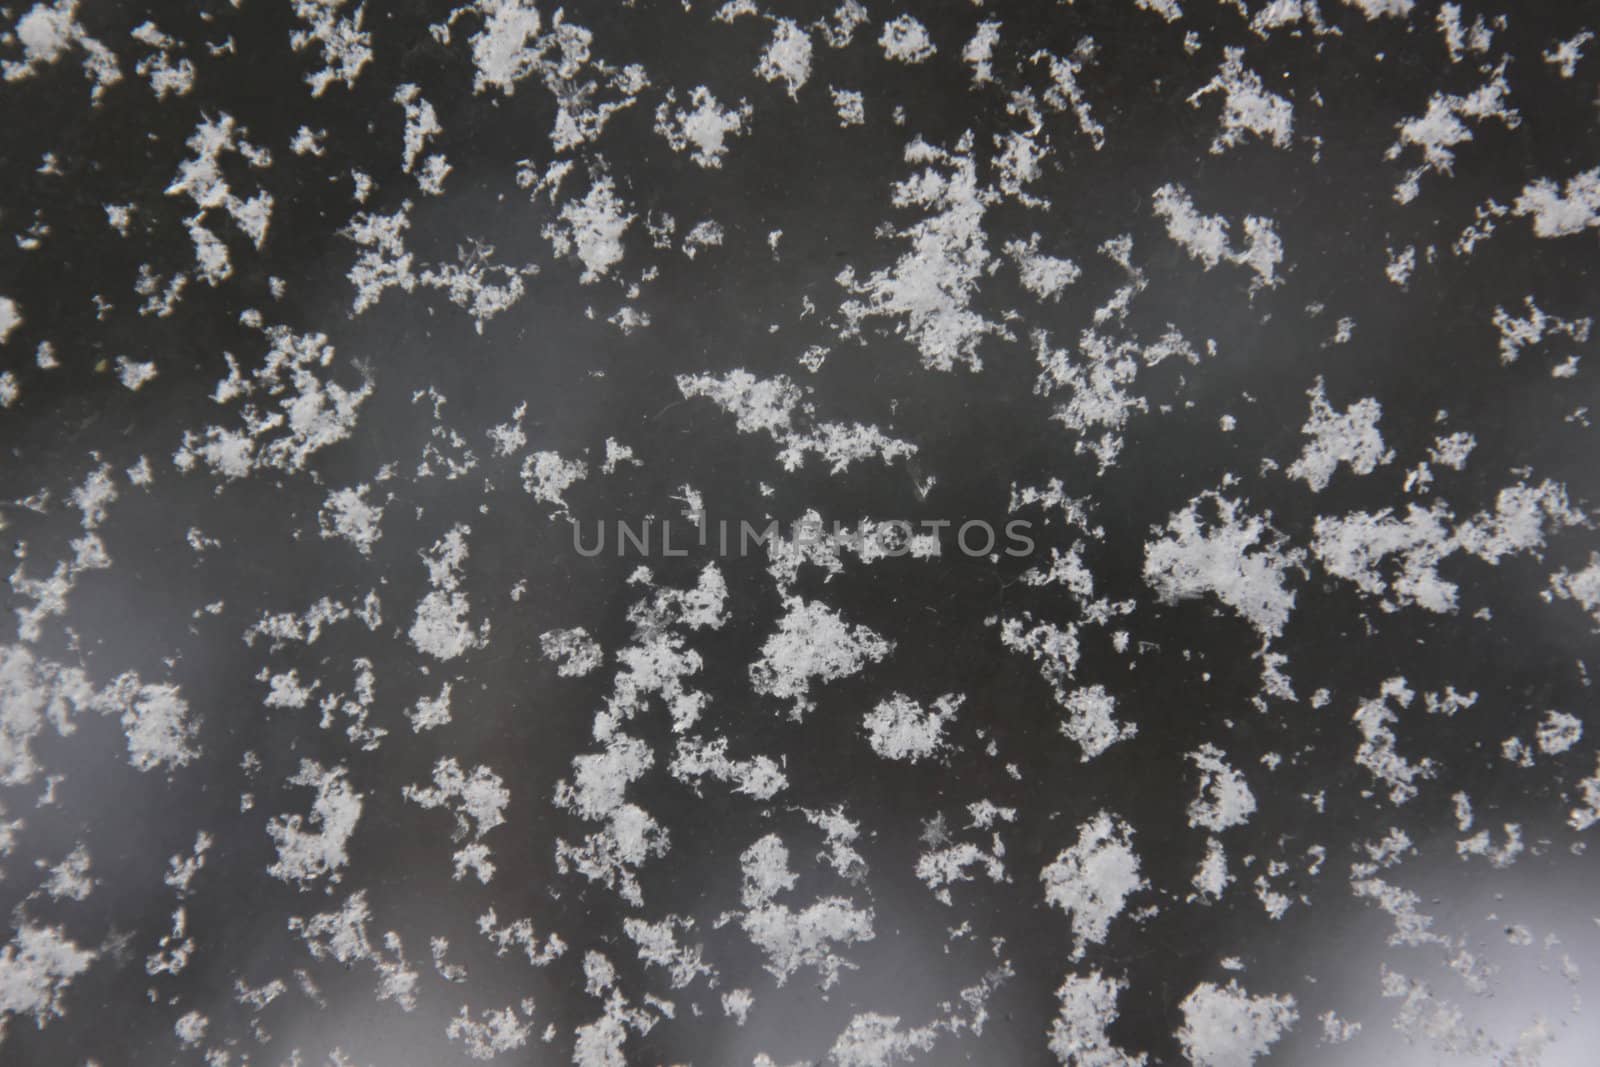 Fresh snowflakes on a window, makes a nice winter background.